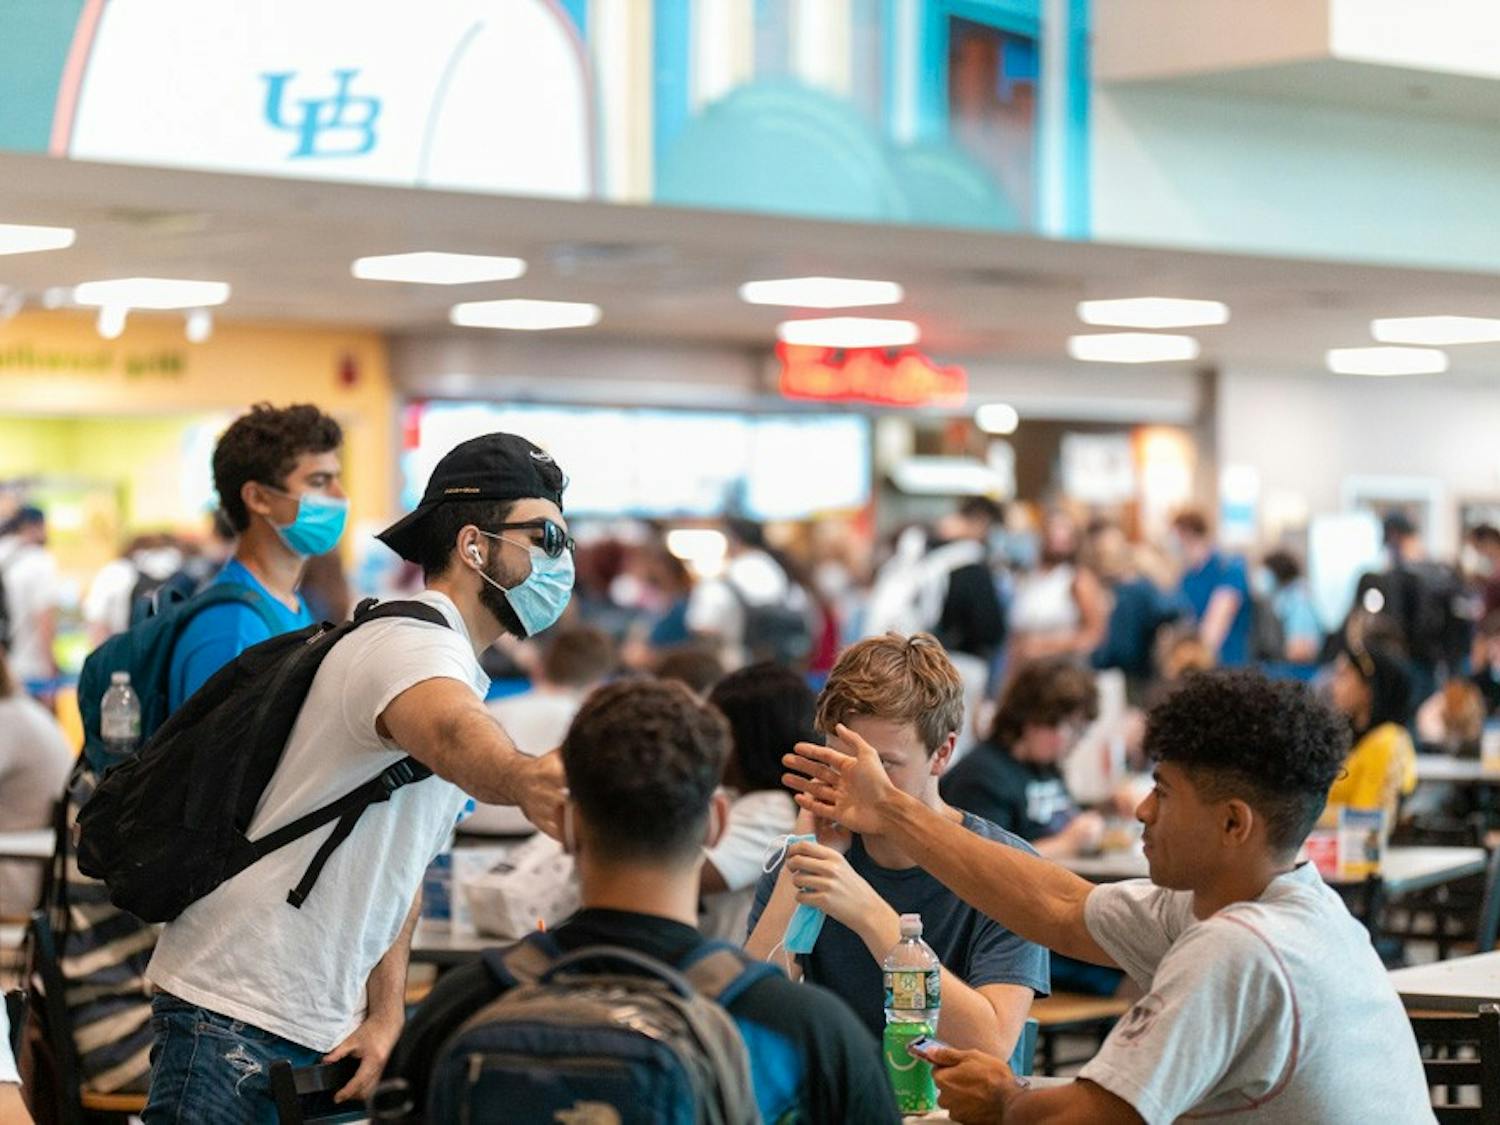 UB will not require masks to be worn on campus beginning March 5.